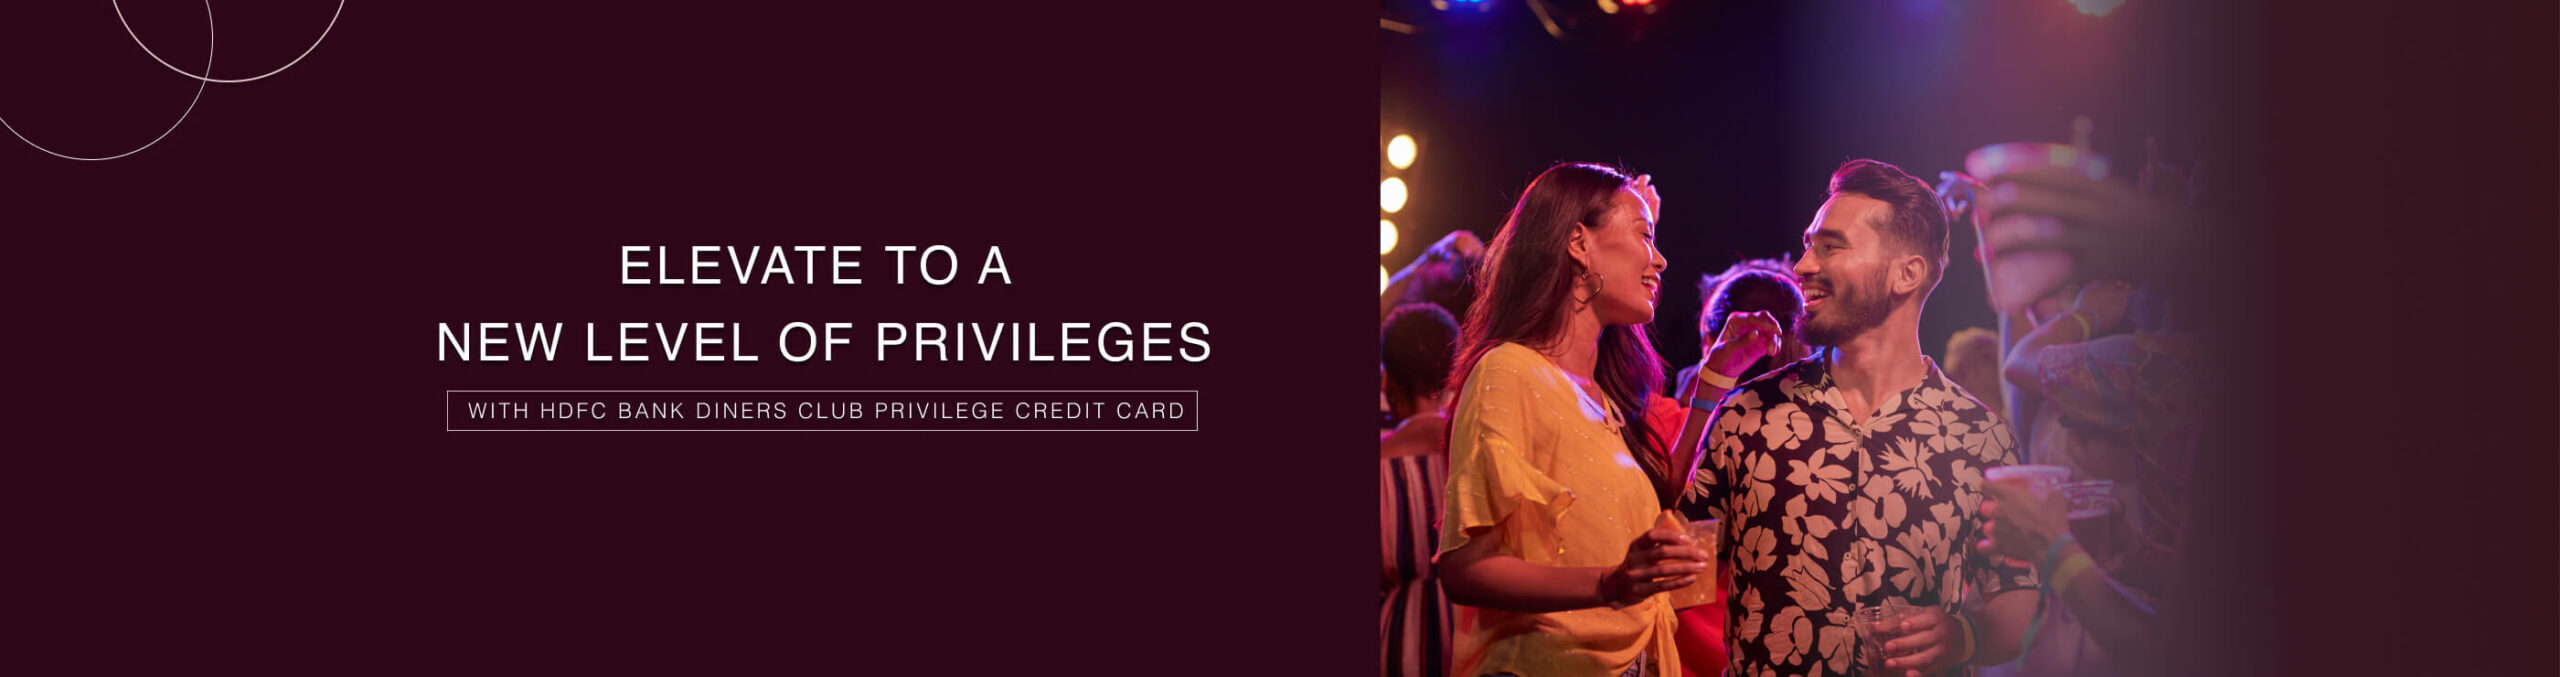 HDFC Bank Diners Club Privilege Credit Card Benefits